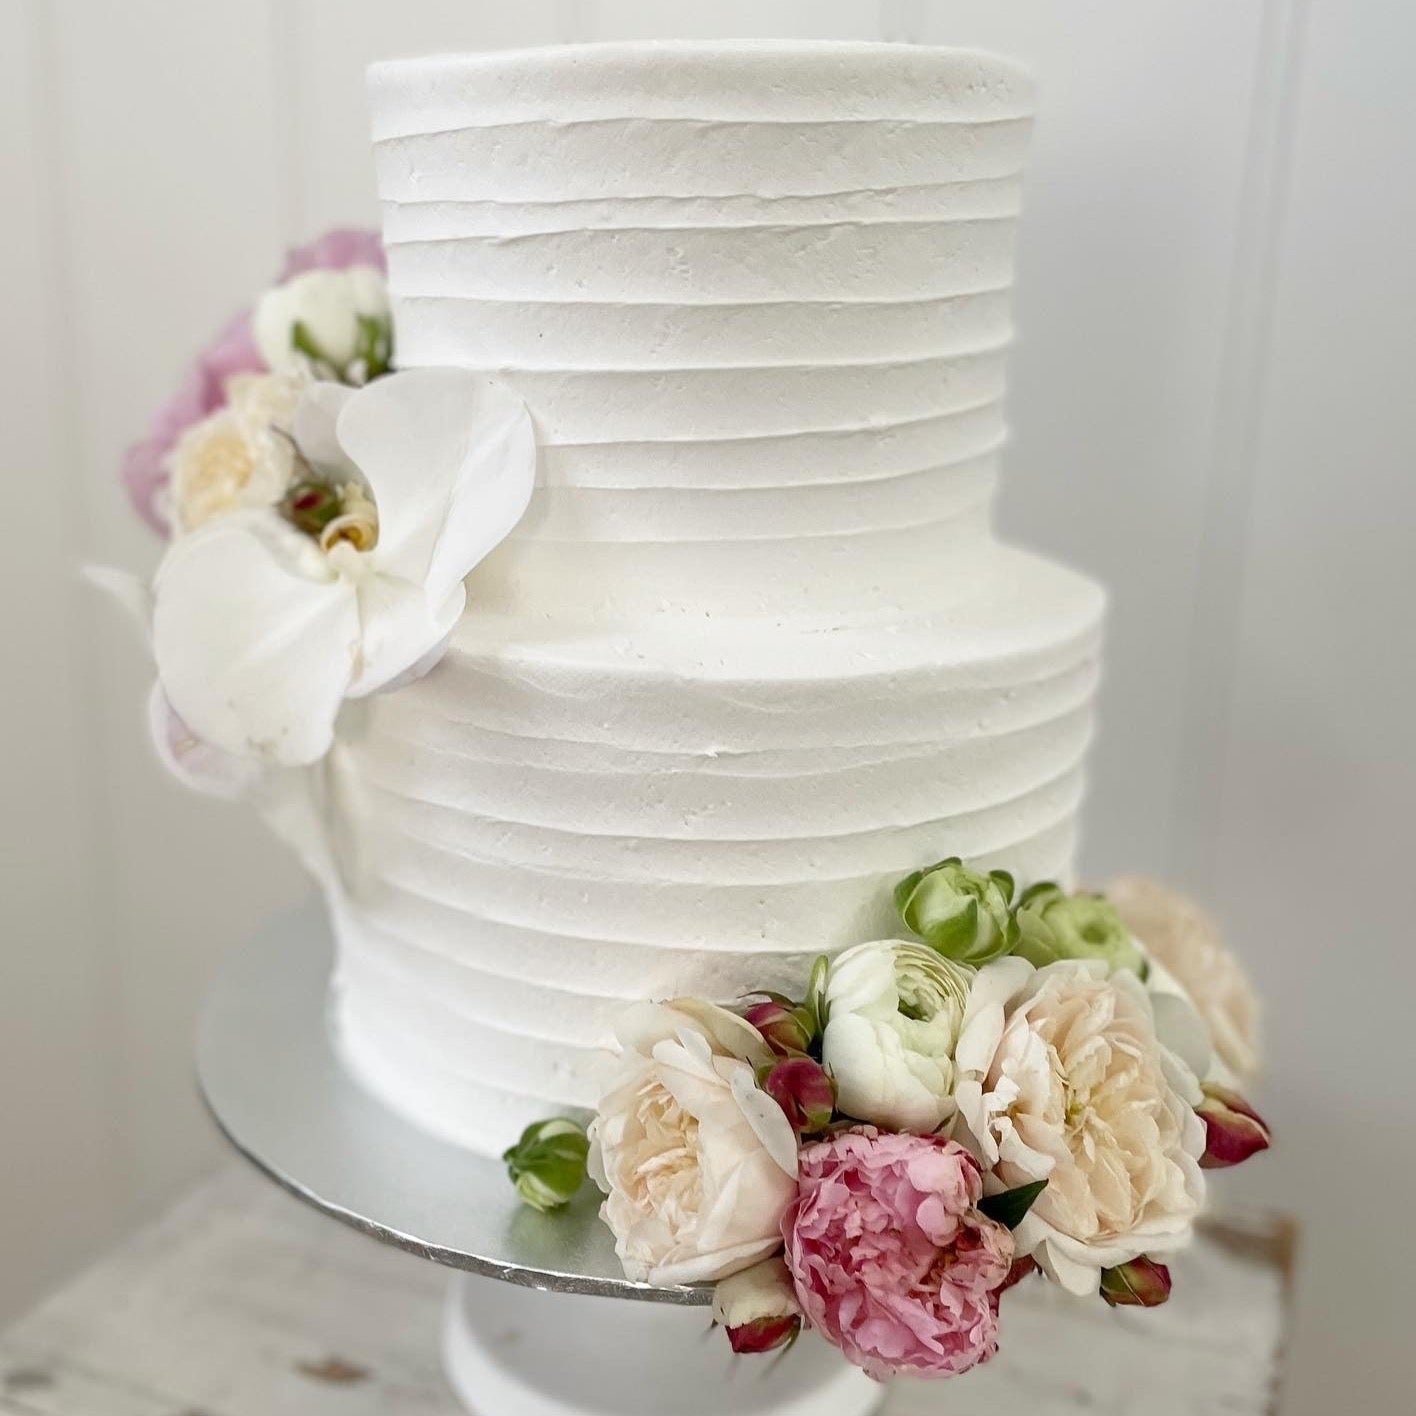 2 Tier Lined Buttercream with Flowers Vegan